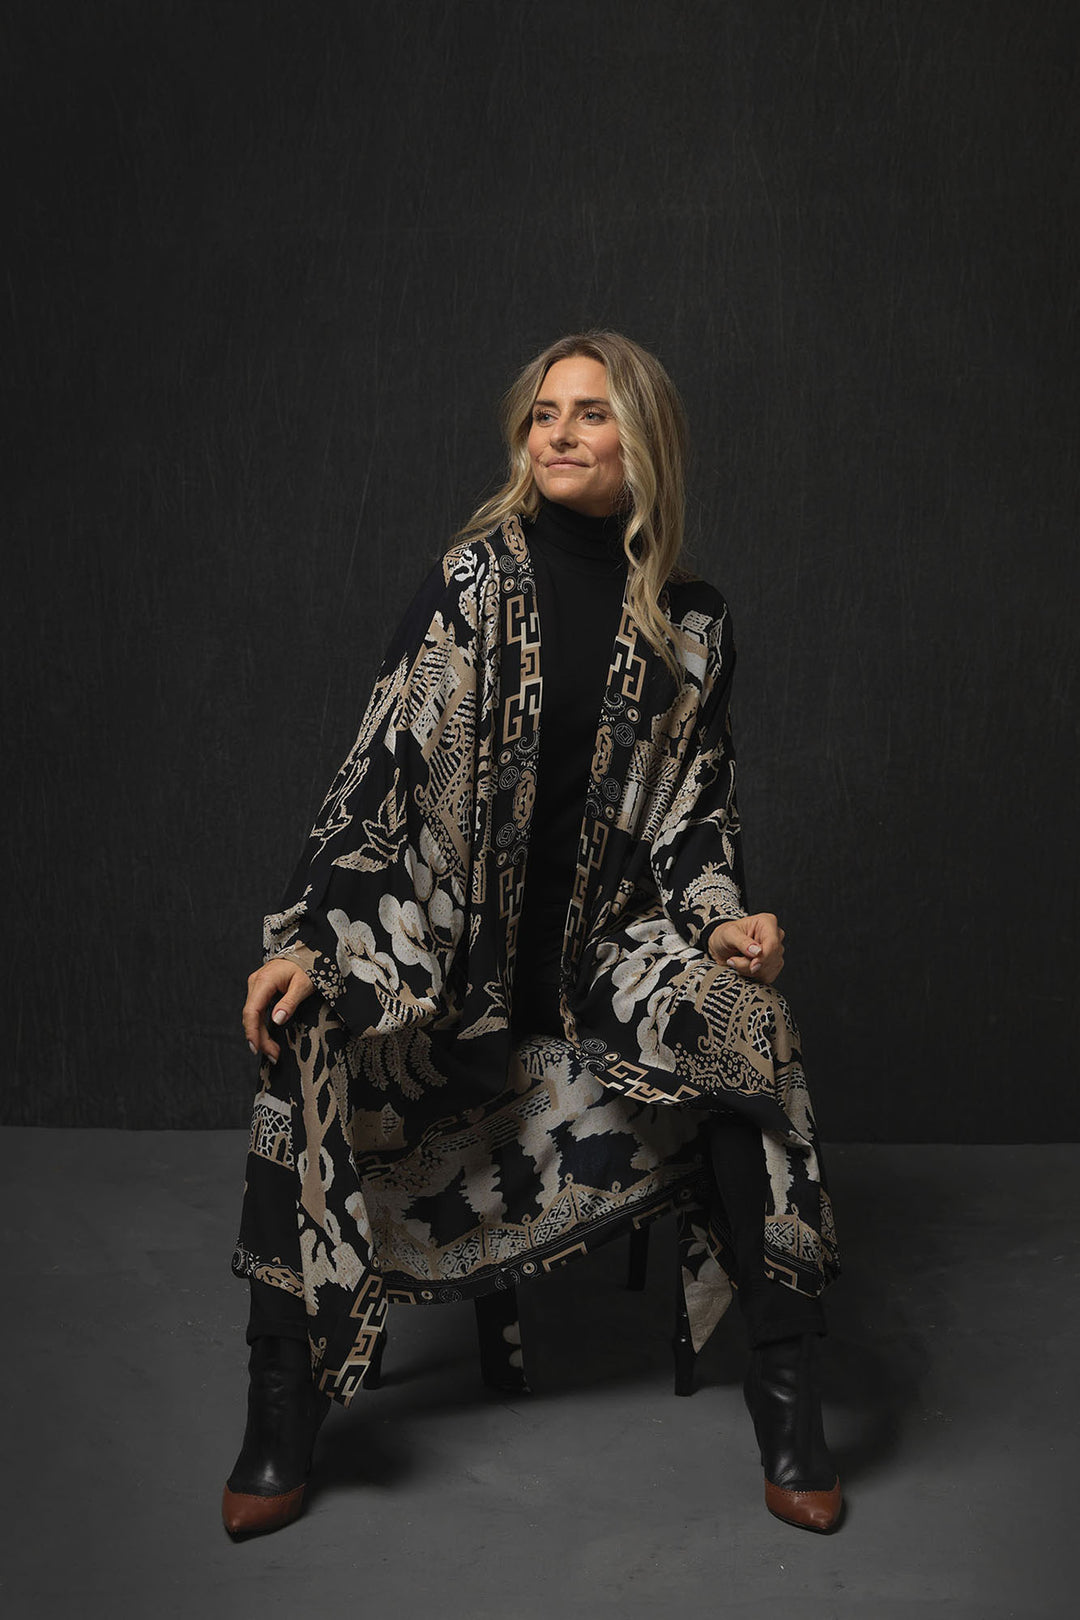 One Hundred Stars Giant Willow Black Crepe Long Kimono- This kimono can be worn two ways, when tied at the back it makes a chic open fronted jacket. Alternatively, it can be worn tied at the front as a closed jacket or dress and secured using the interior waist tie. 